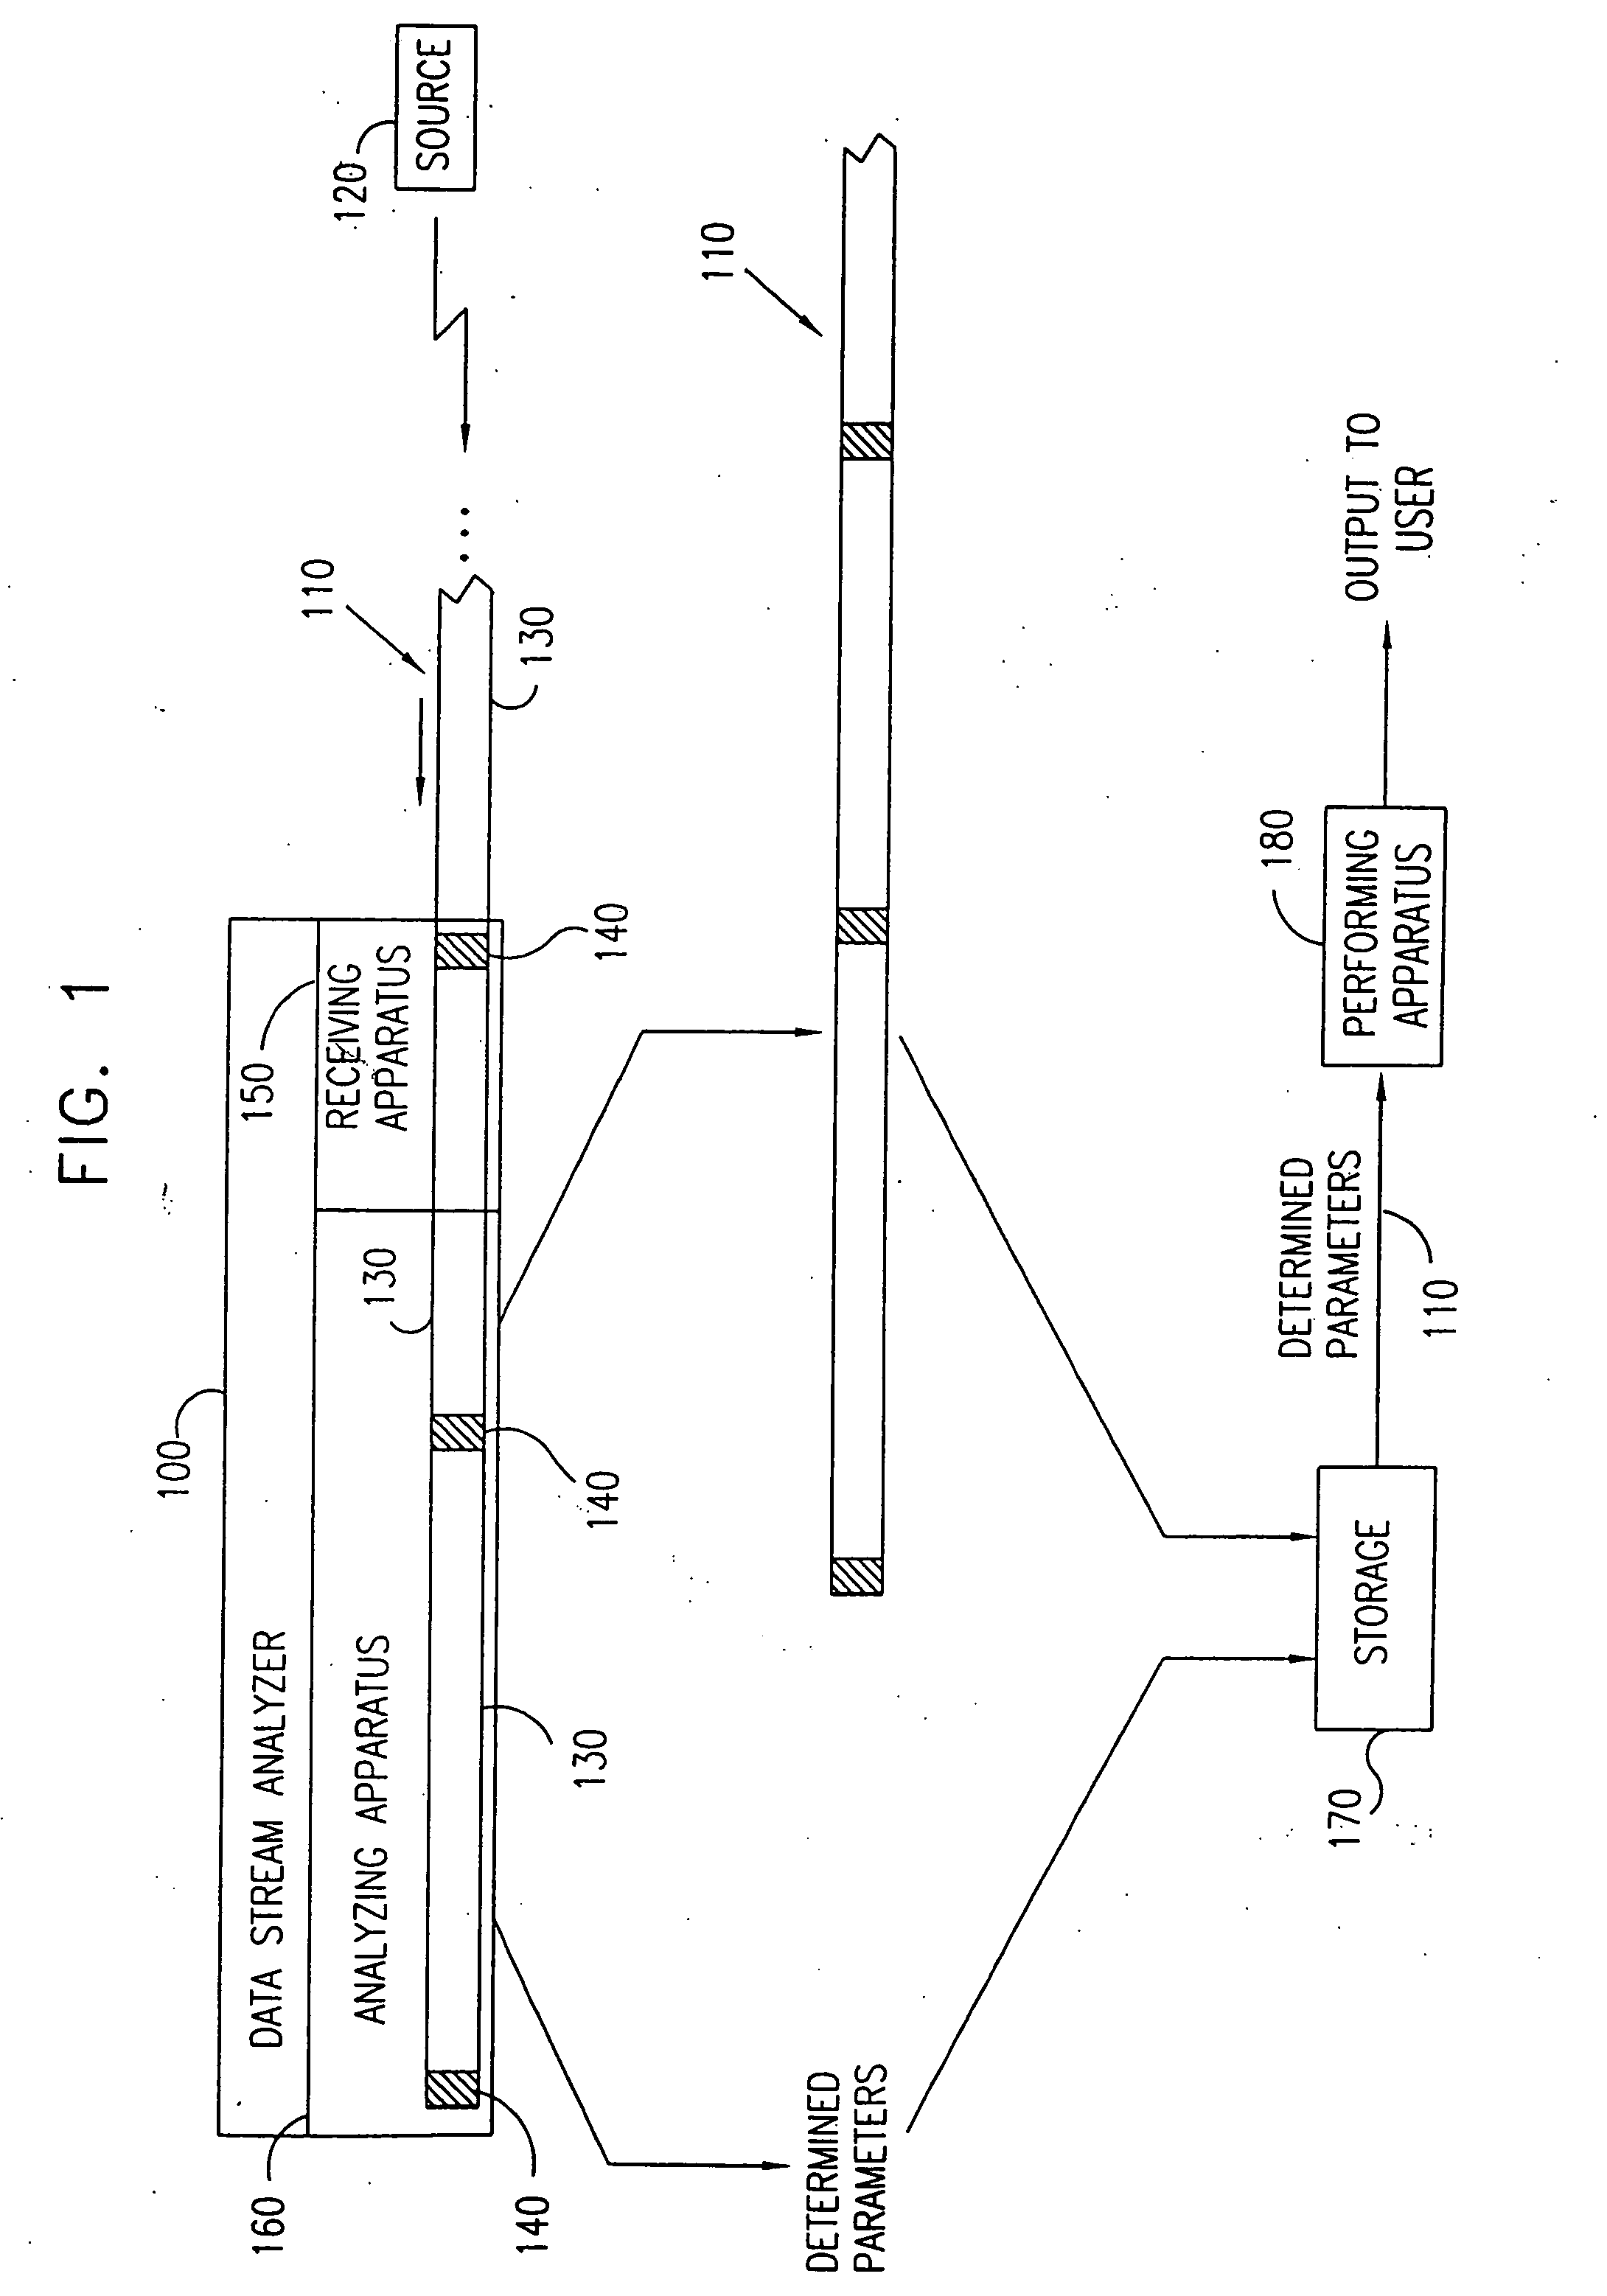 System for data stream processing